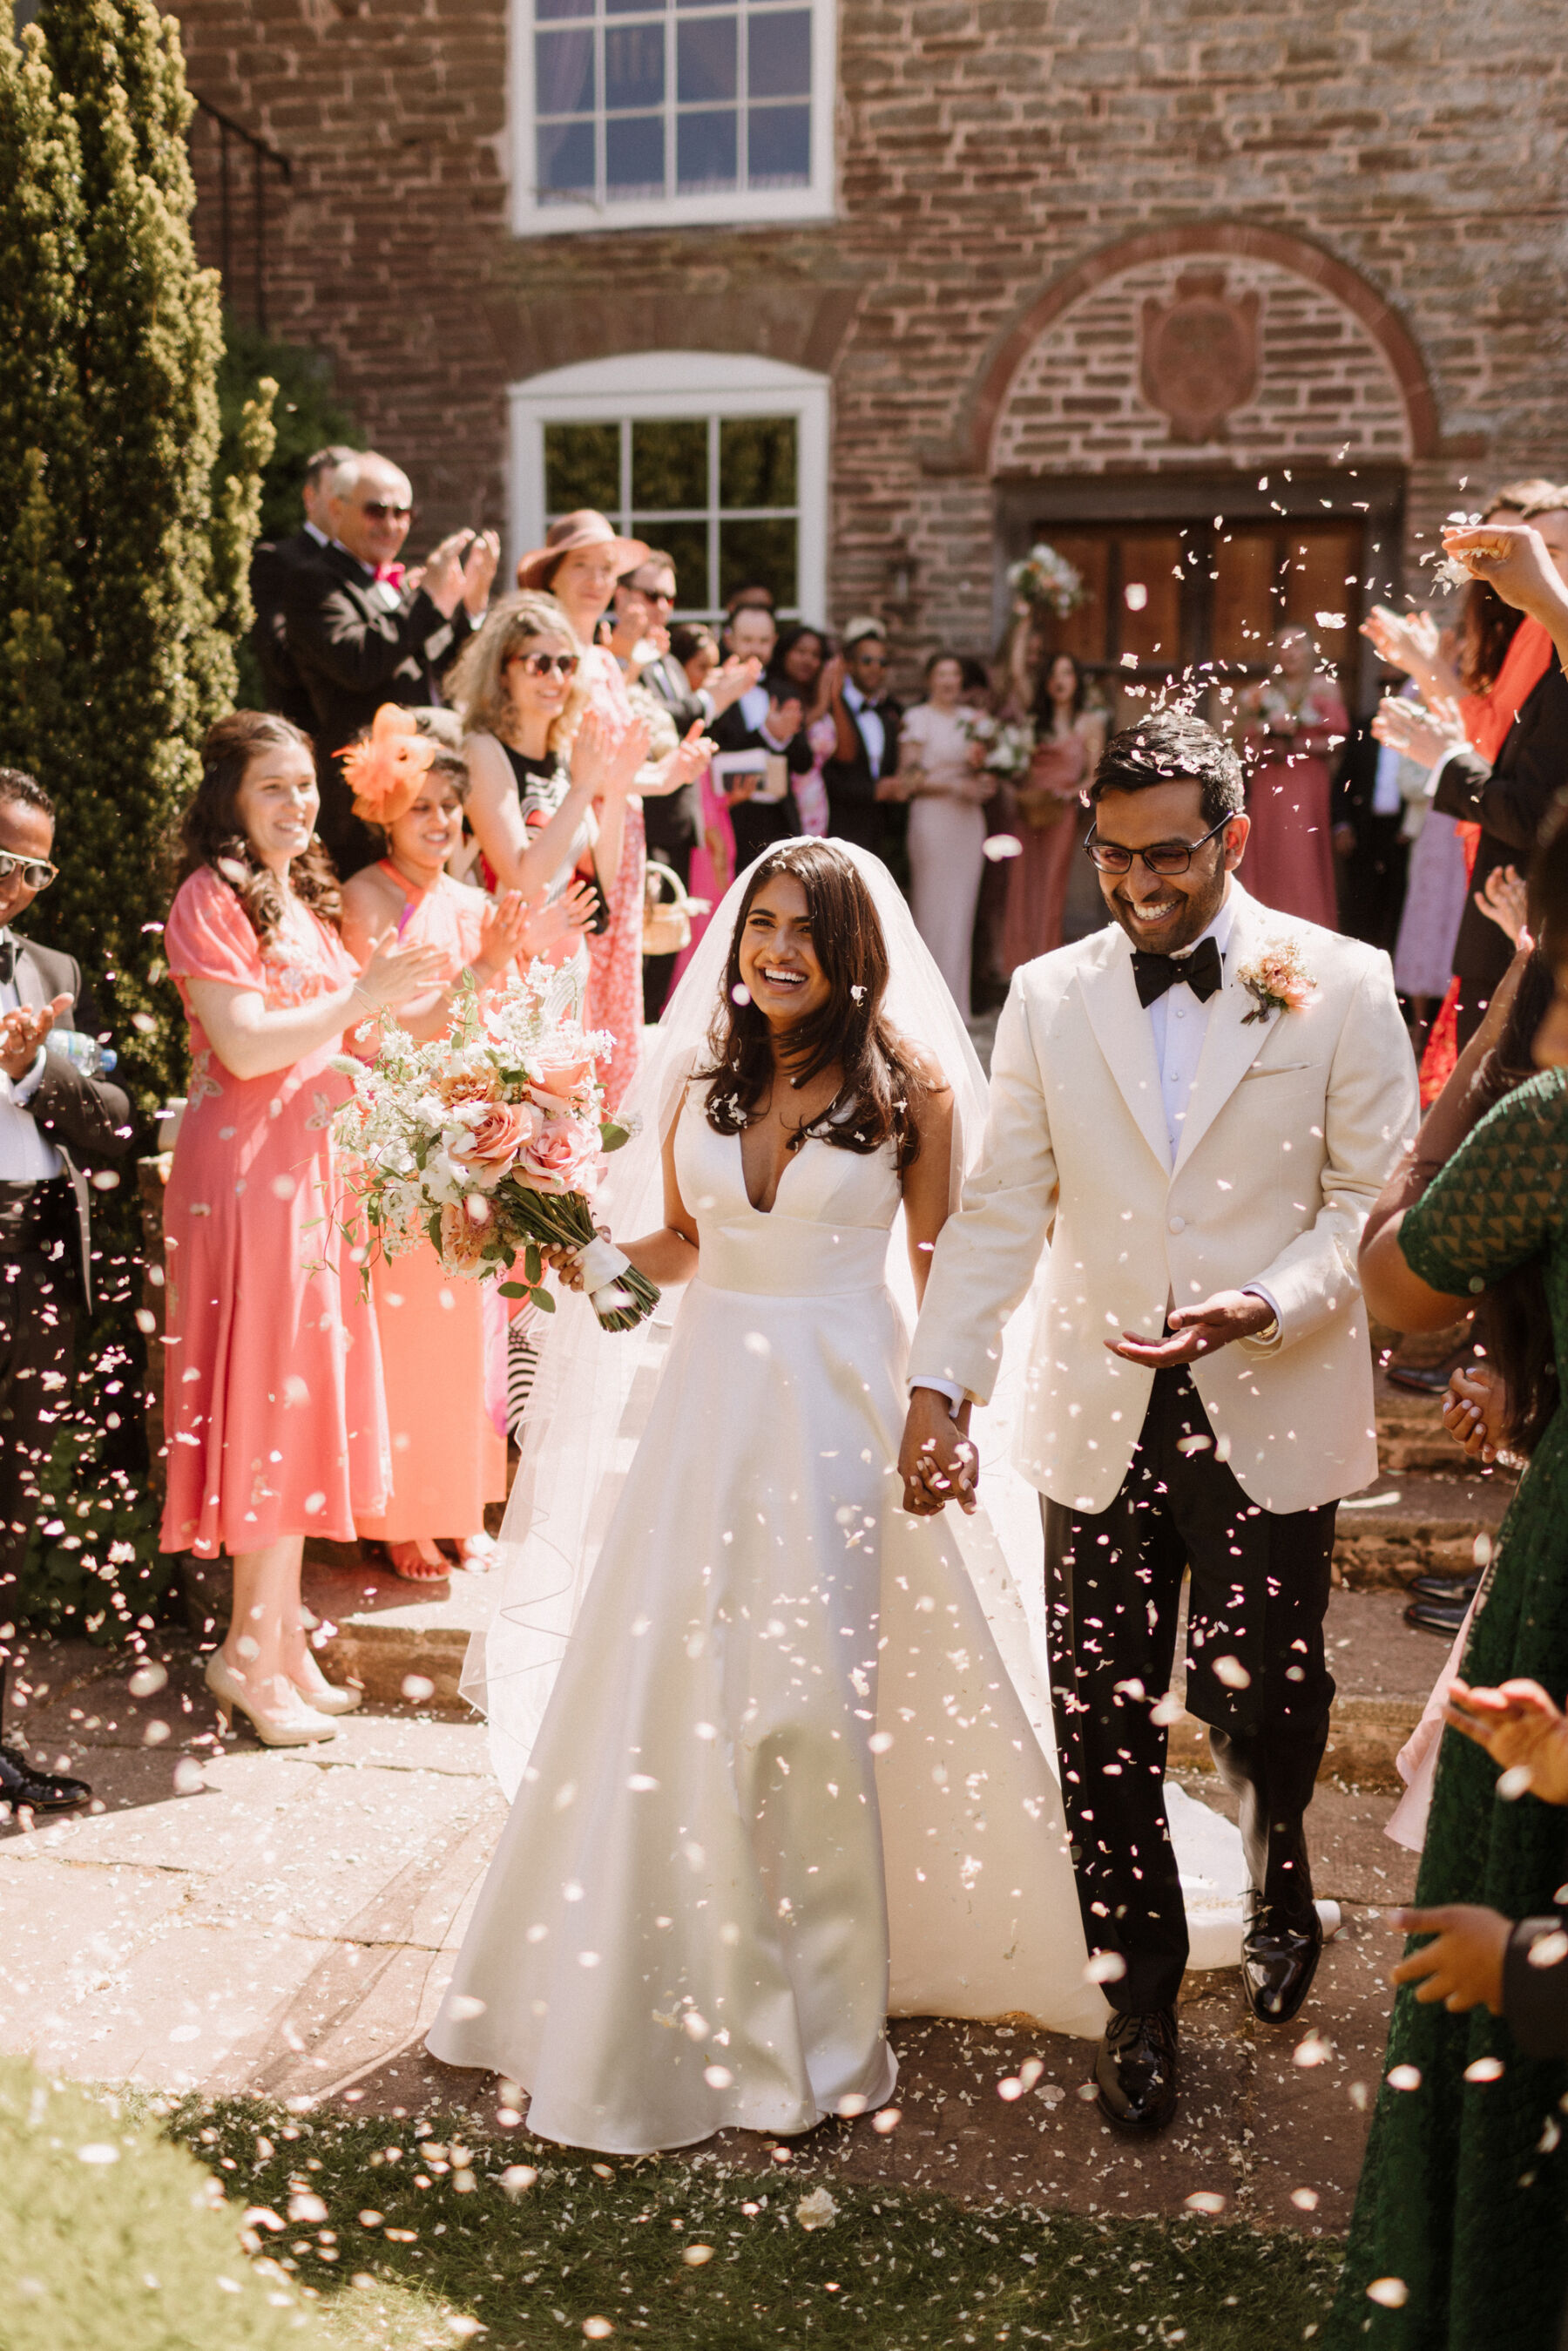 Bride and groom with confetti at Dewsall Court, country house wedding venue in Herefordshire